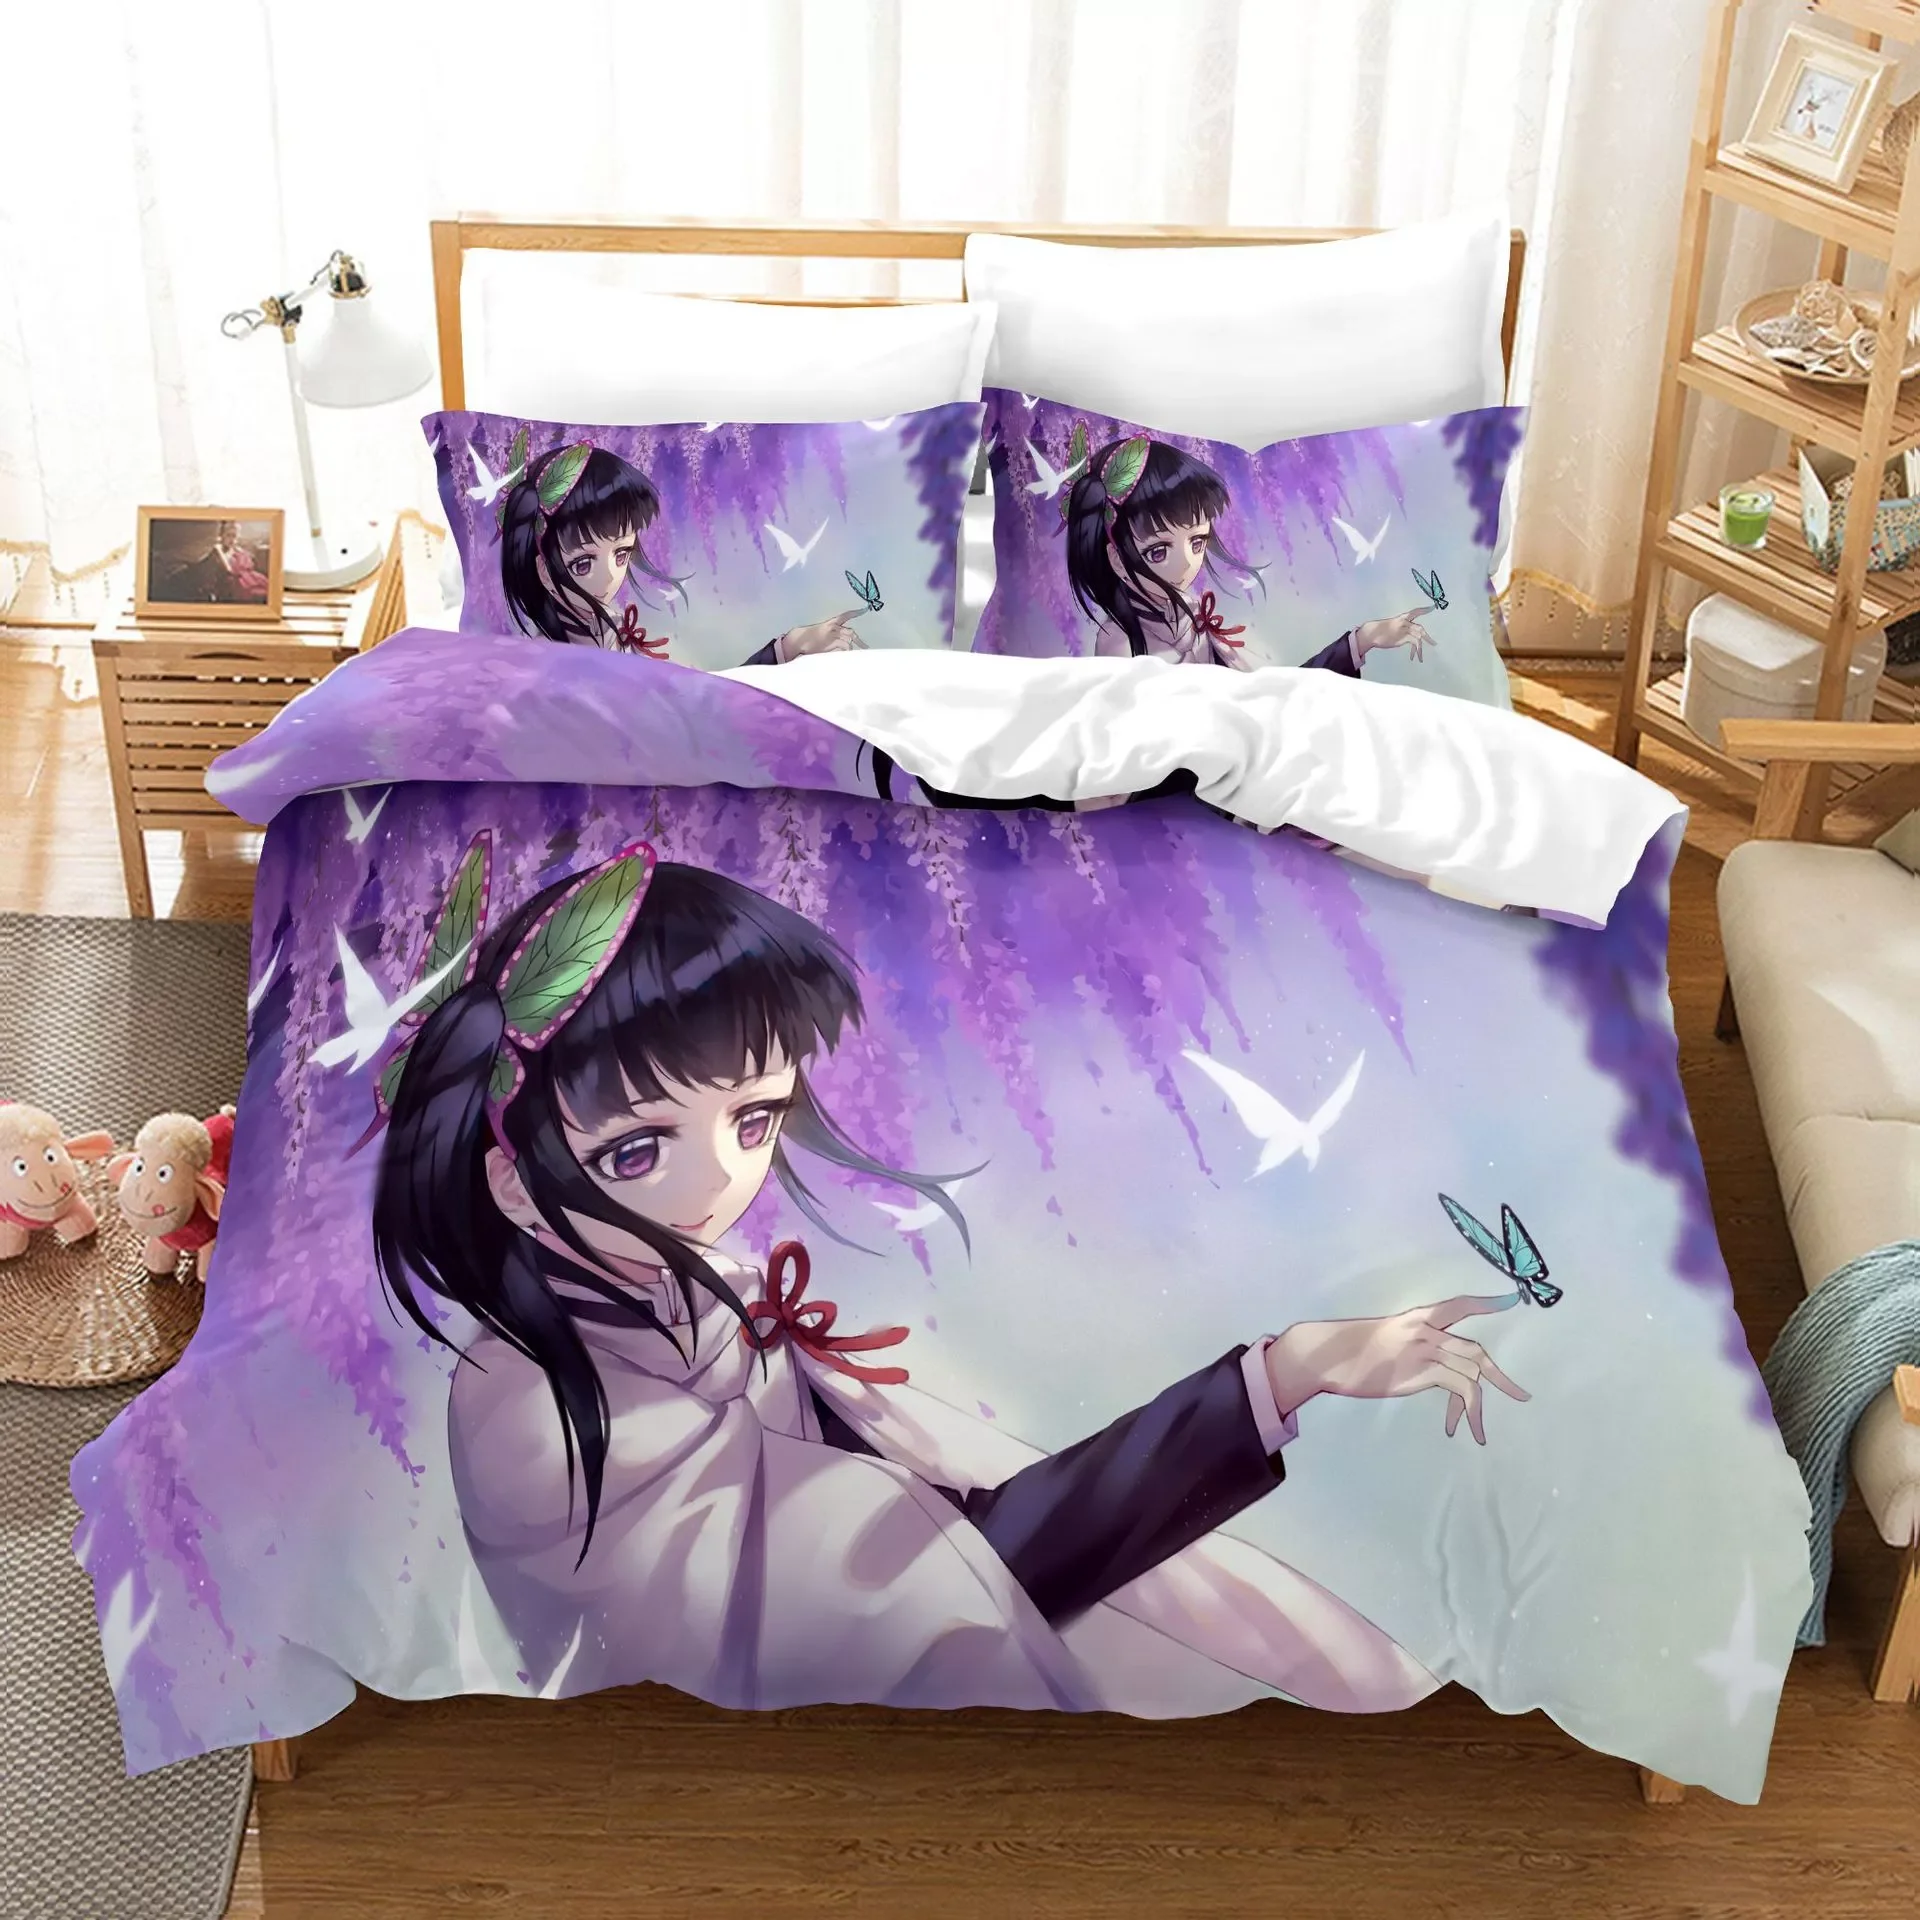 Anime Gear 5 Bedding Sets 3D Kids Duvet Cover Set With Pillowcase Single  Double Queen King Bedclothes Bed Linen For Boys Girls - AliExpress